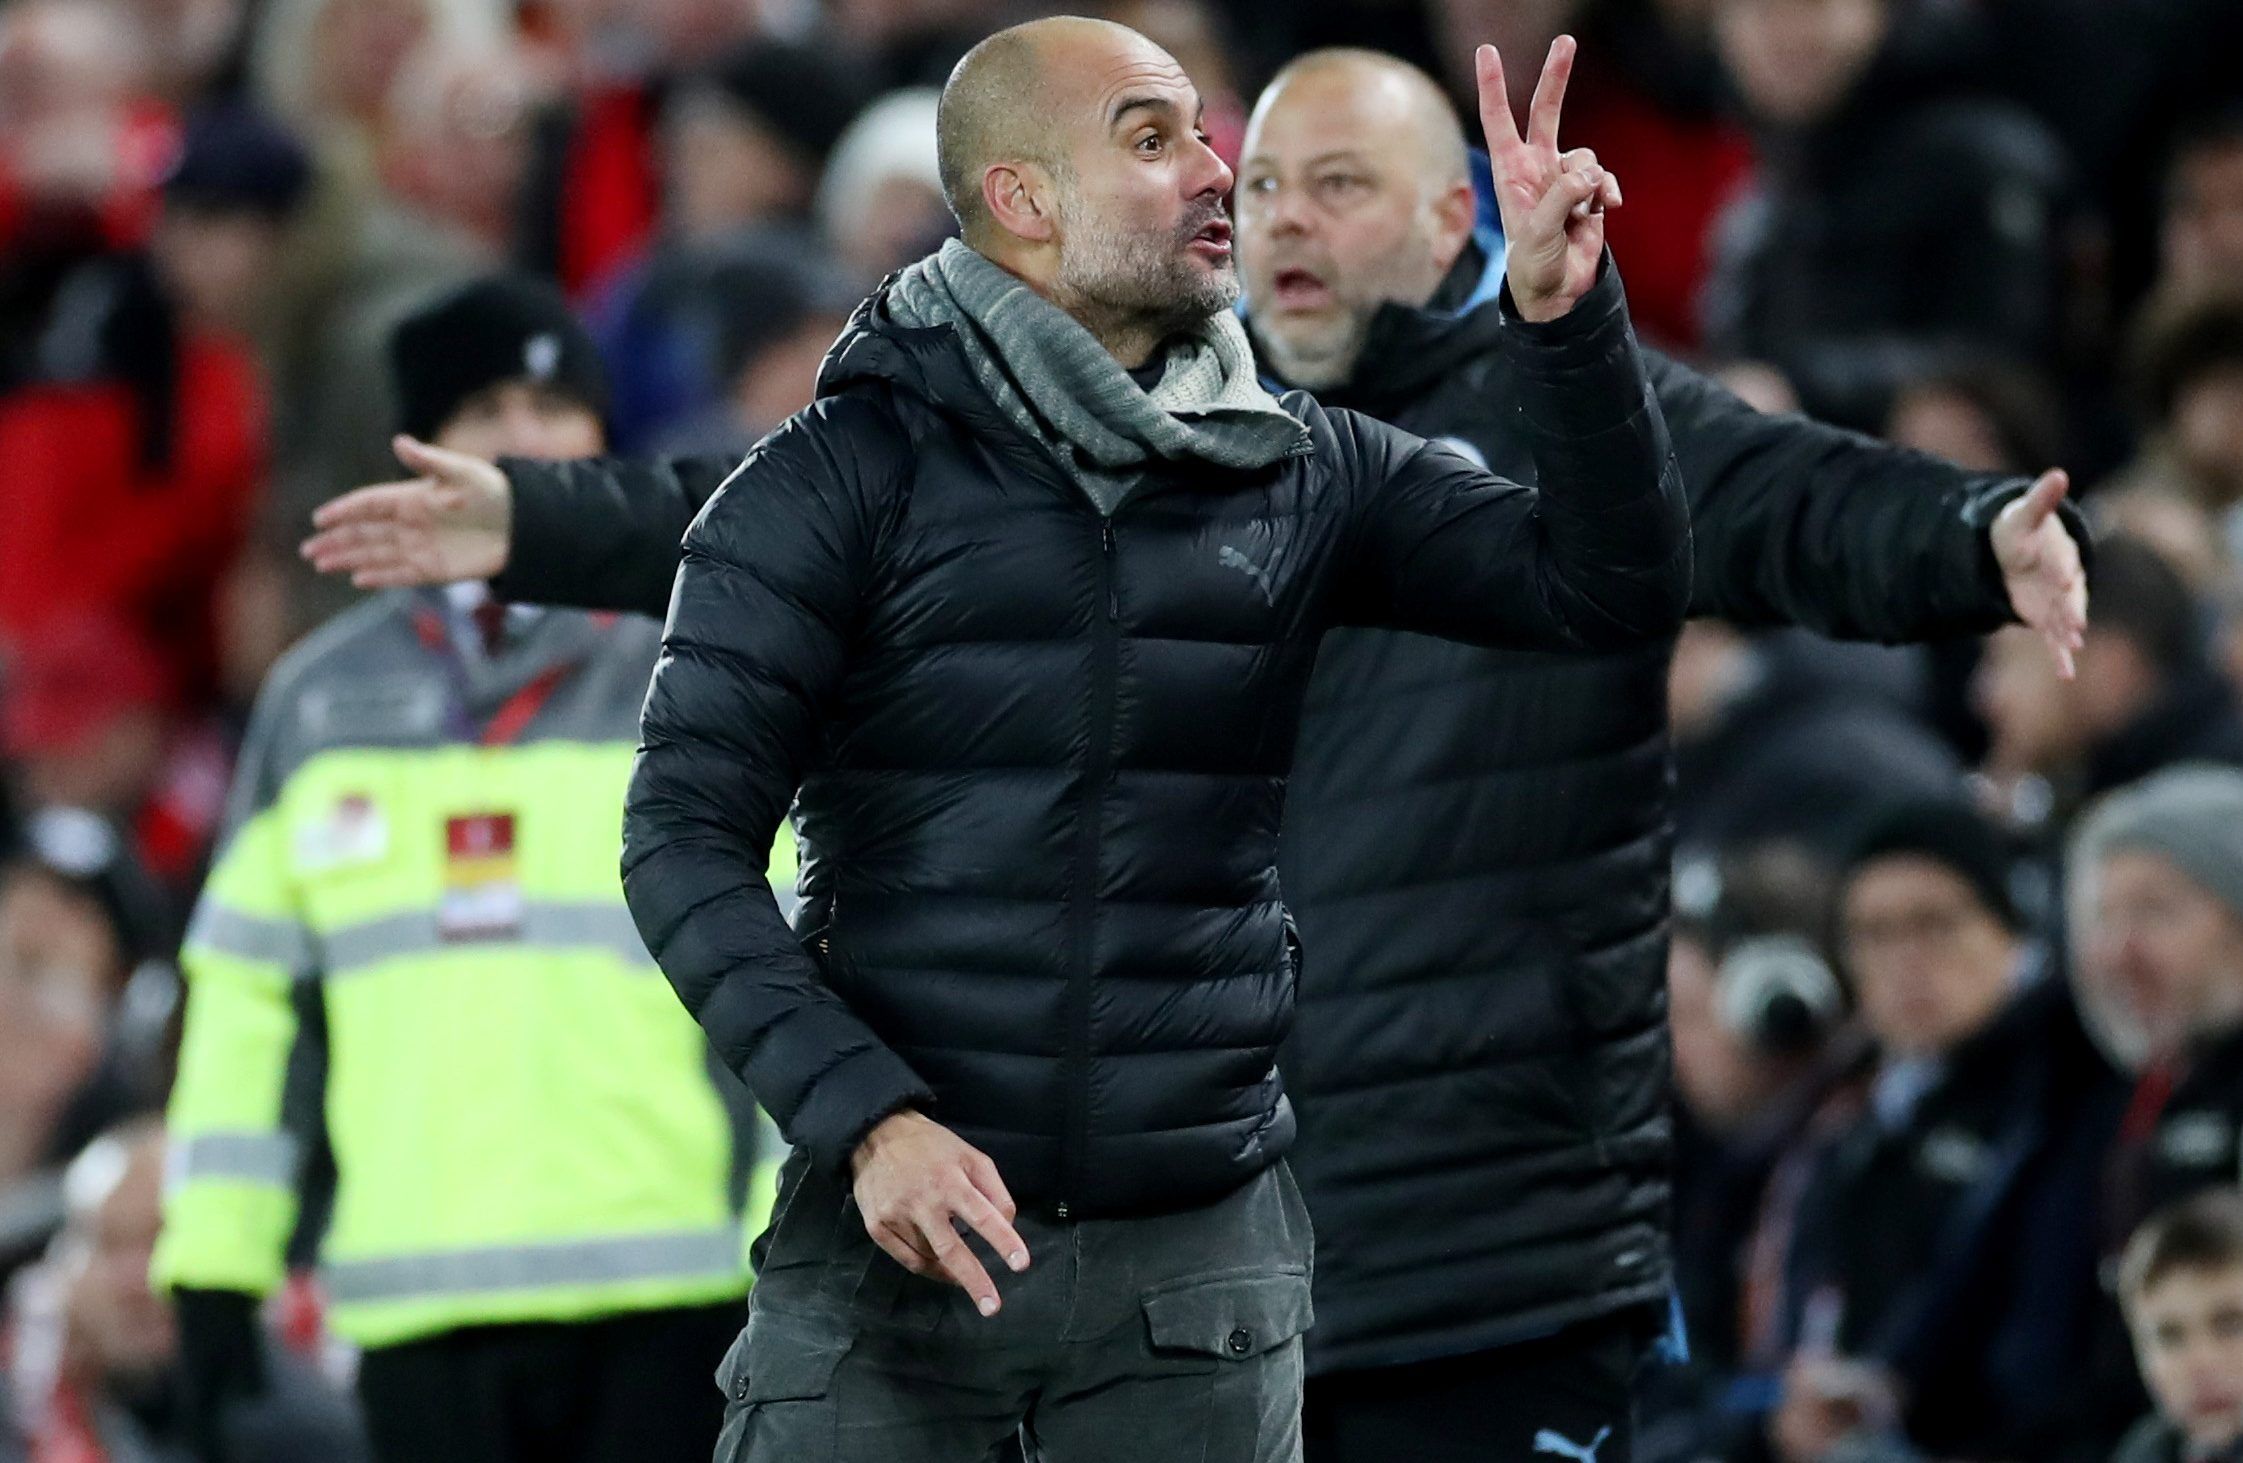 Soccer Football - Premier League - Liverpool v Manchester City - Anfield, Liverpool, Britain - November 10, 2019  Manchester City manager Pep Guardiola gestures  Action Images via Reuters/Carl Recine  EDITORIAL USE ONLY. No use with unauthorized audio, video, data, fixture lists, club/league logos or 